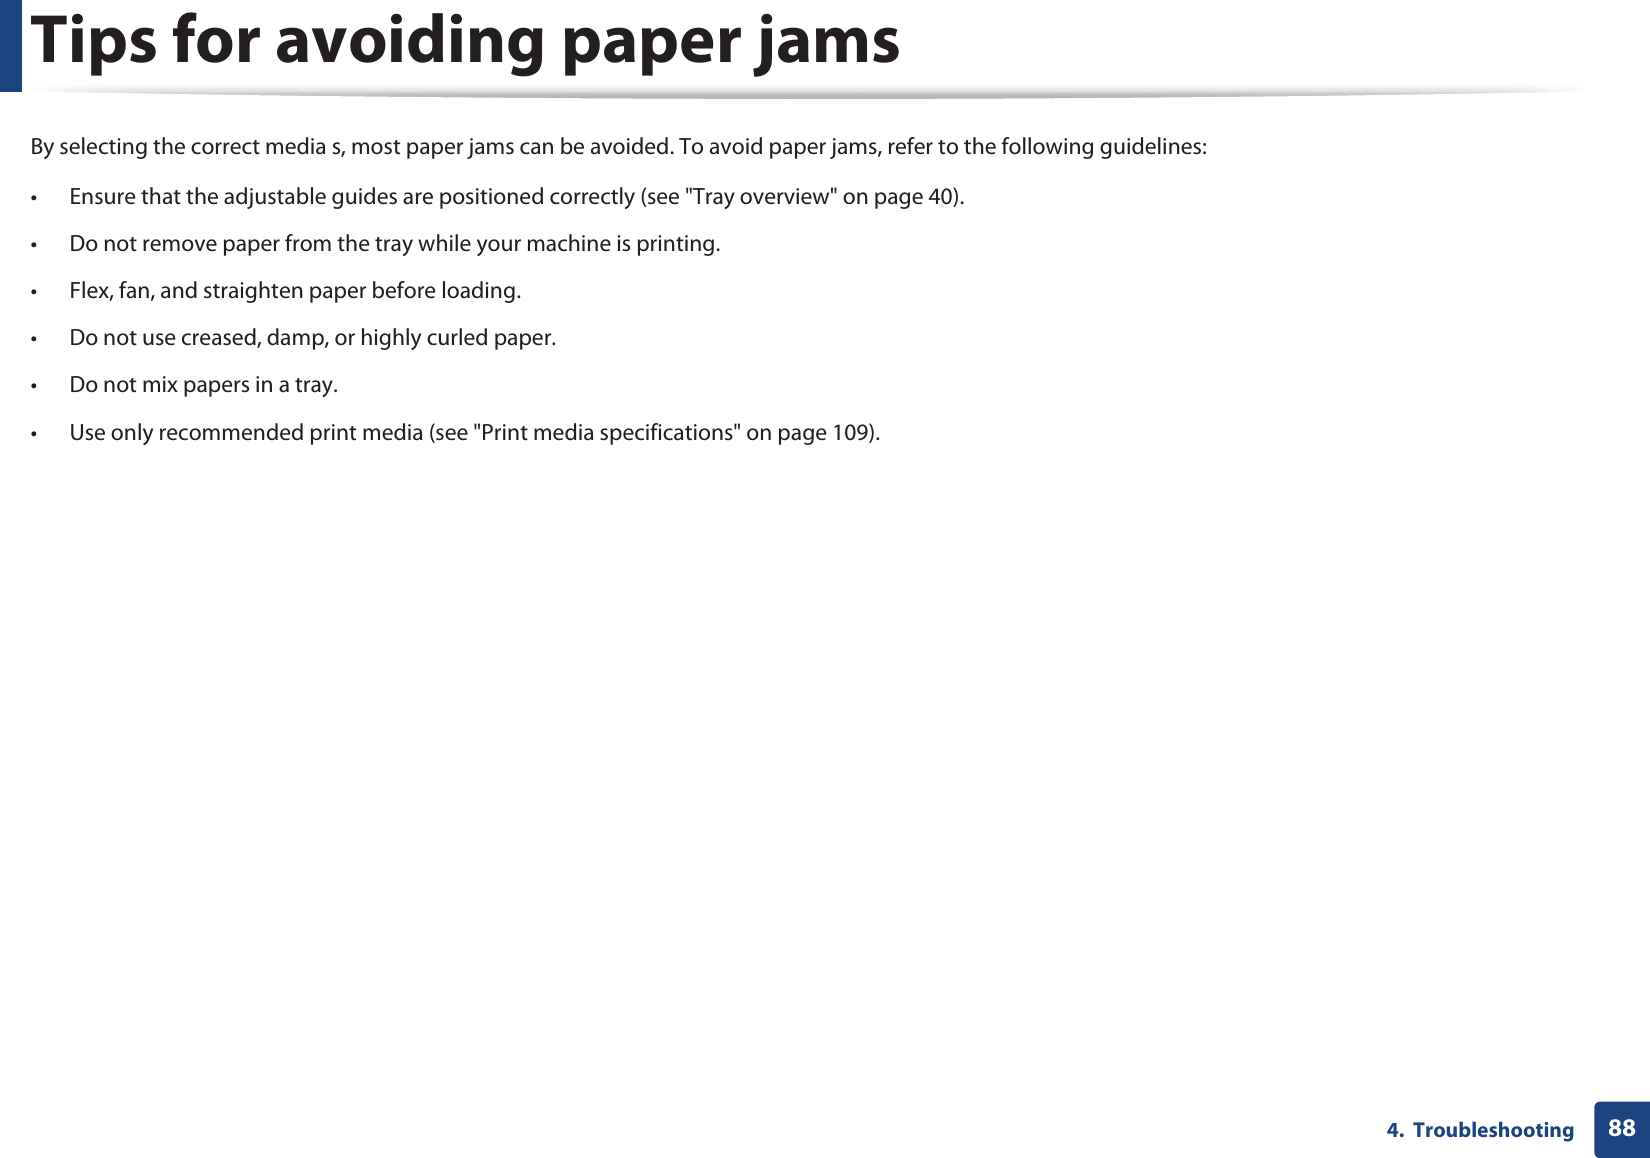 884.  TroubleshootingTips for avoiding paper jamsBy selecting the correct media s, most paper jams can be avoided. To avoid paper jams, refer to the following guidelines:• Ensure that the adjustable guides are positioned correctly (see &quot;Tray overview&quot; on page 40).• Do not remove paper from the tray while your machine is printing.• Flex, fan, and straighten paper before loading. • Do not use creased, damp, or highly curled paper.• Do not mix papers in a tray.• Use only recommended print media (see &quot;Print media specifications&quot; on page 109).